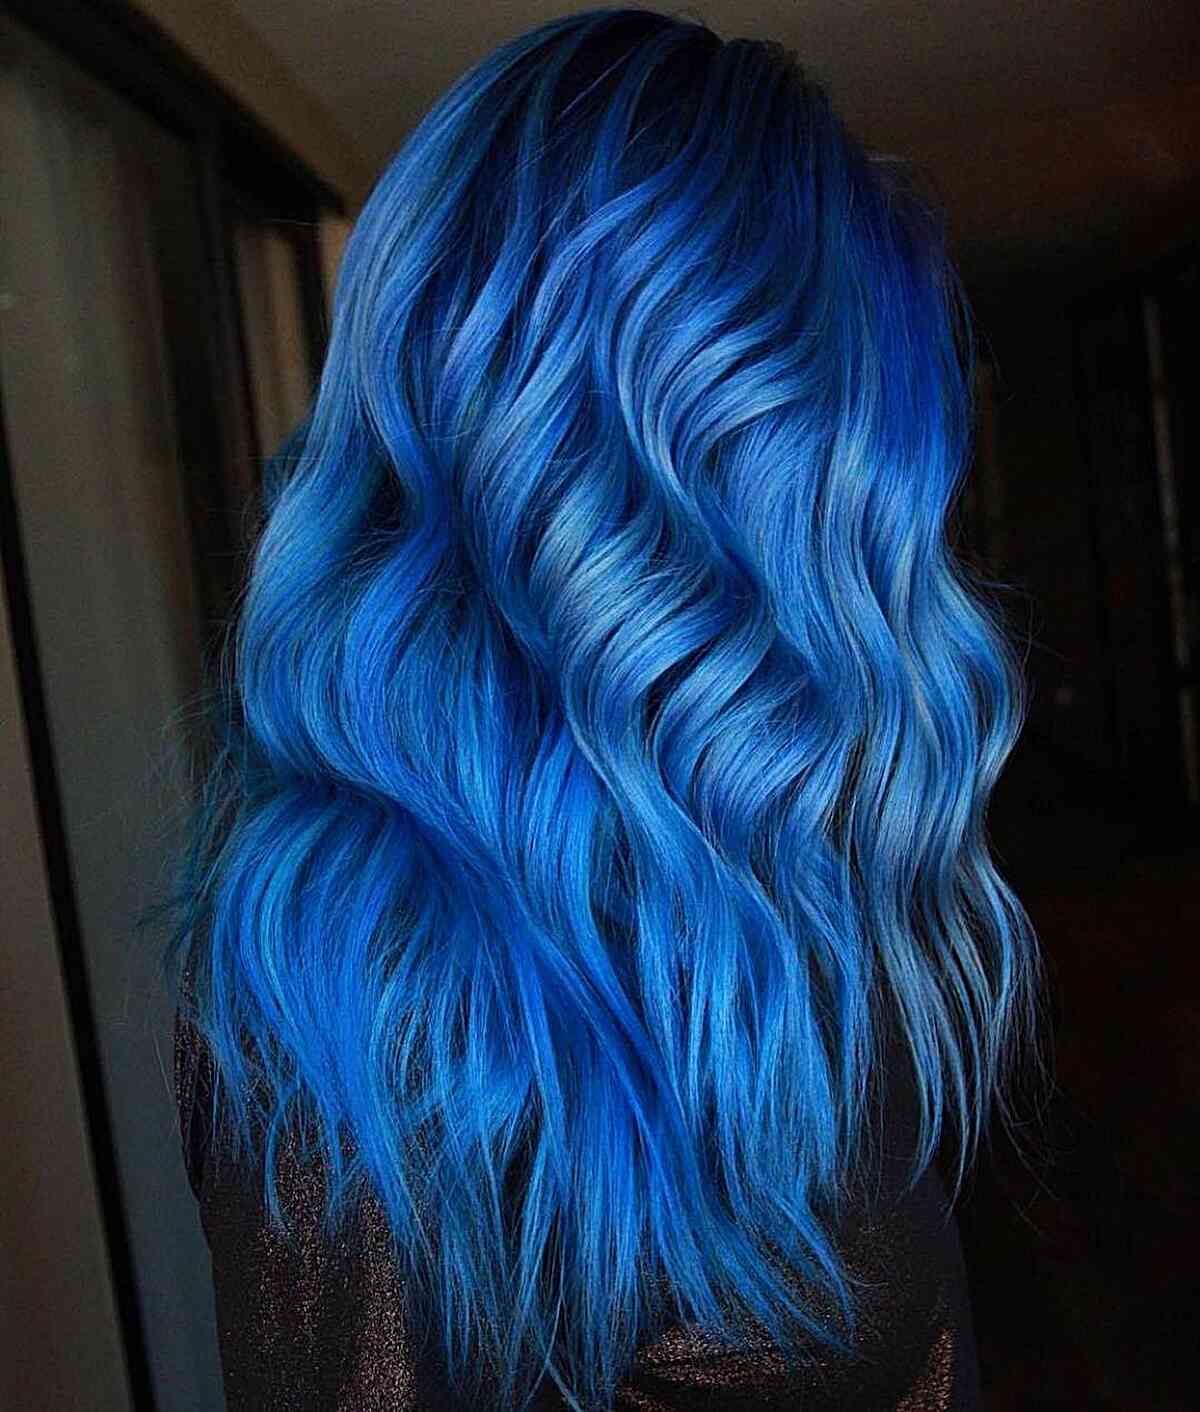 Icy Blue Balayage for ladies with vibrant, long wavy hair